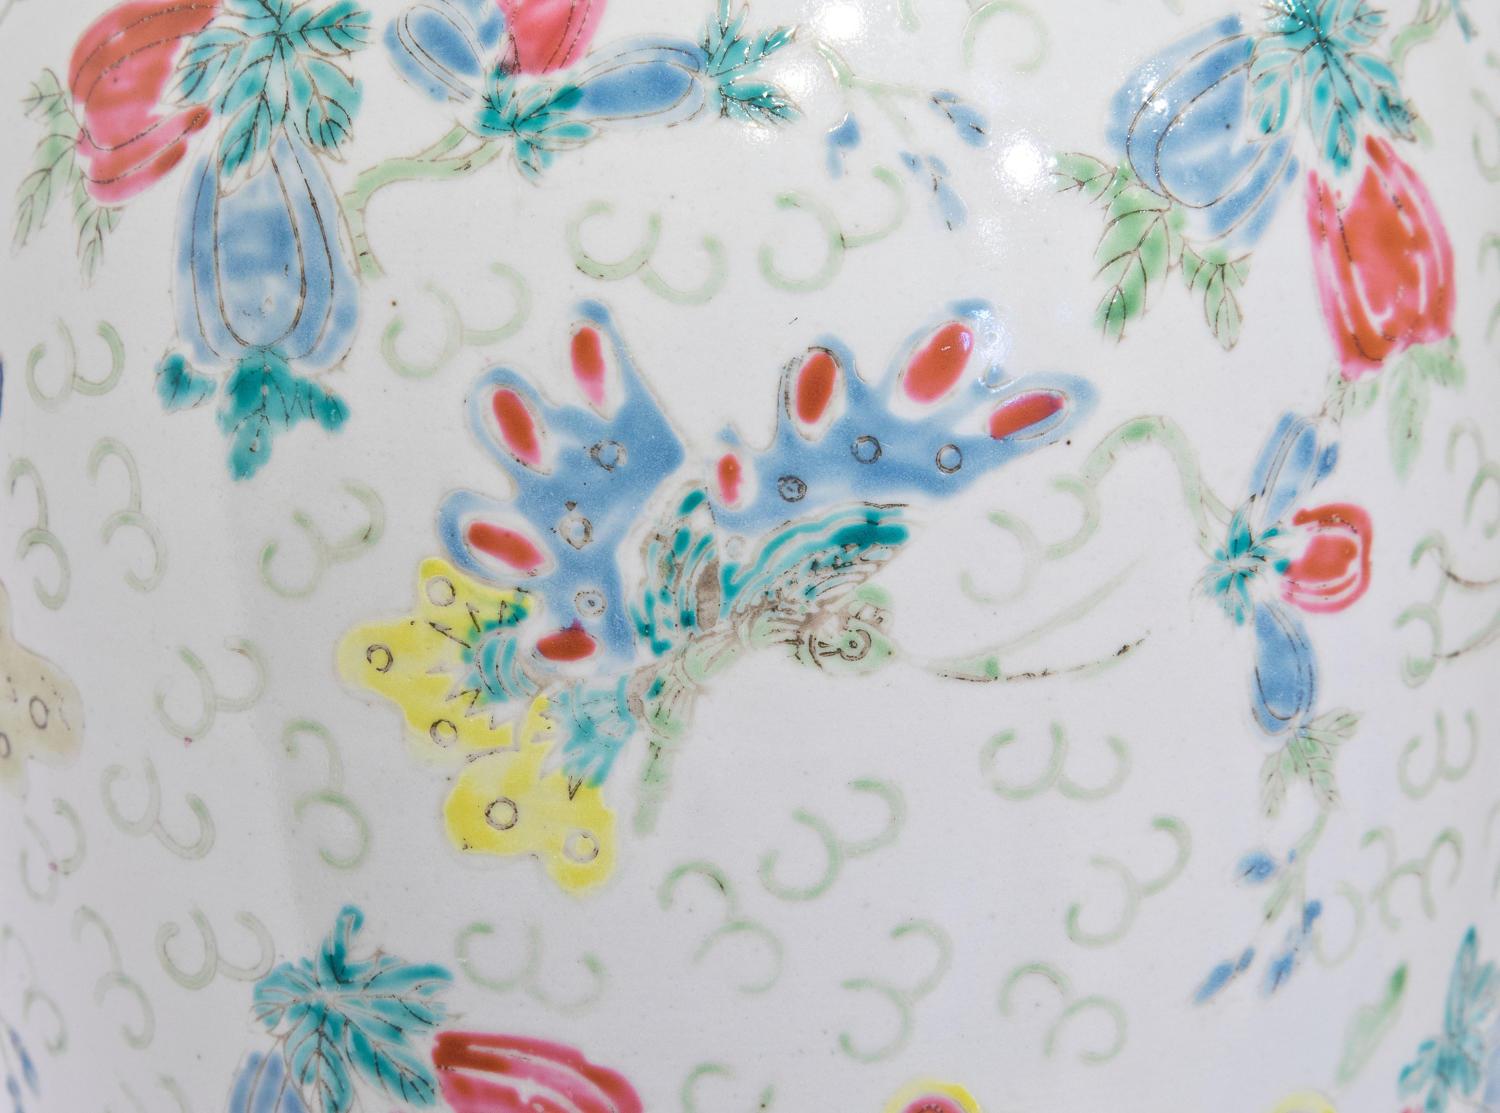 Chinese porcelain lidded vase with printed mark beneath,

circa 1930.